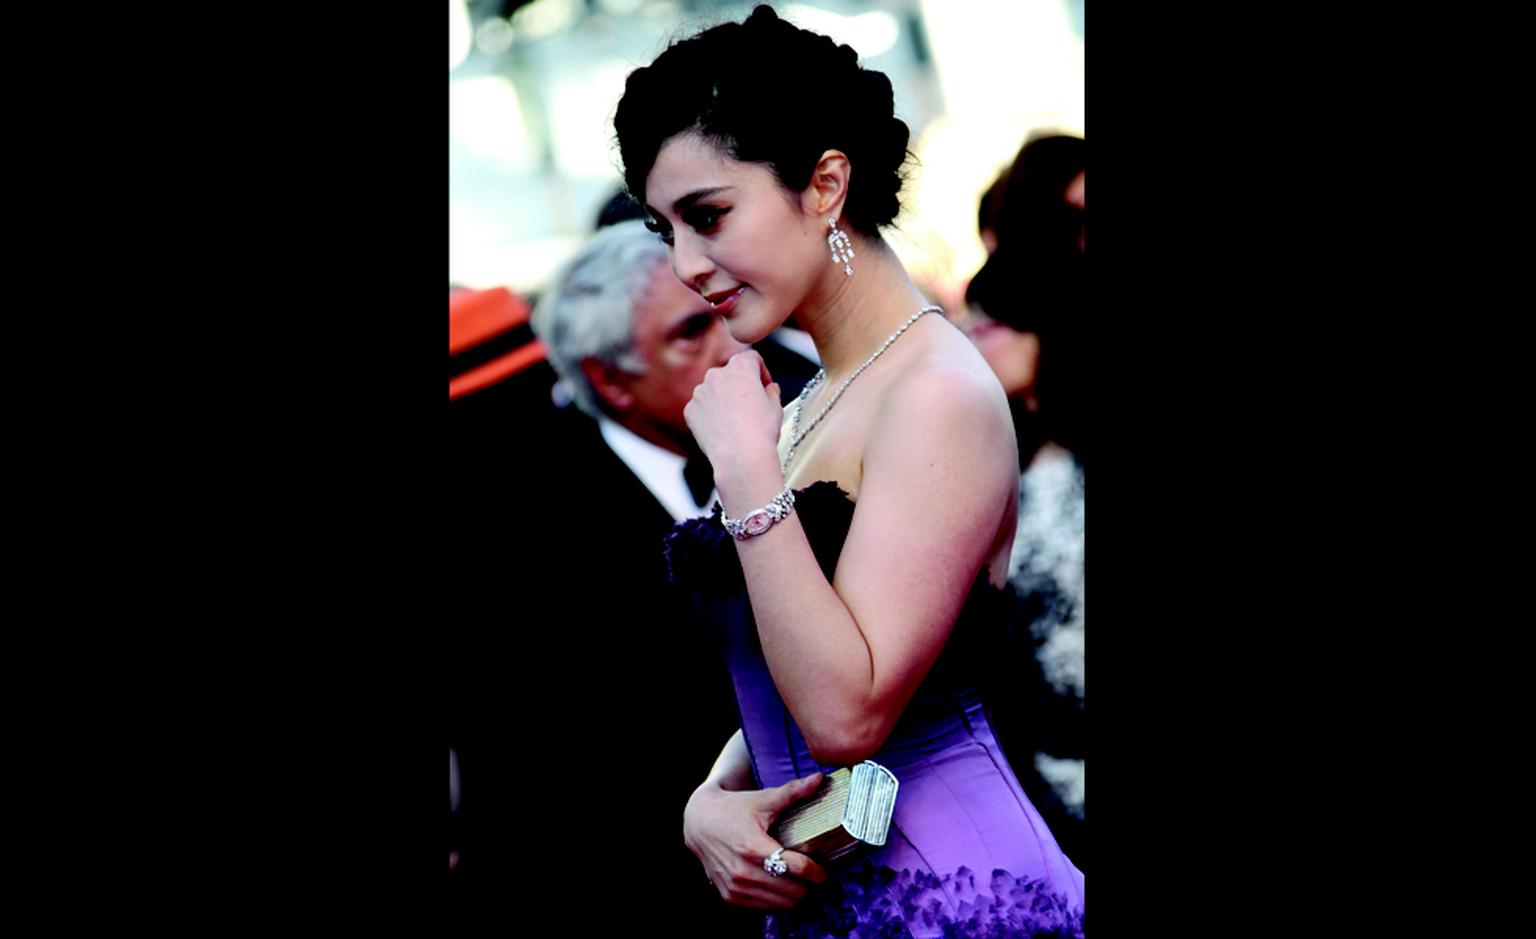 CANNES, FRANCE - MAY 15:  Actress Fan Bingbing with Cartier jewelry attends "The Artist" Premiere at the Palais des Festivals during the 64th Cannes Film Festival on May 15, 2011 in Cannes, France.  (Photo by Tony Barson/WireImage)